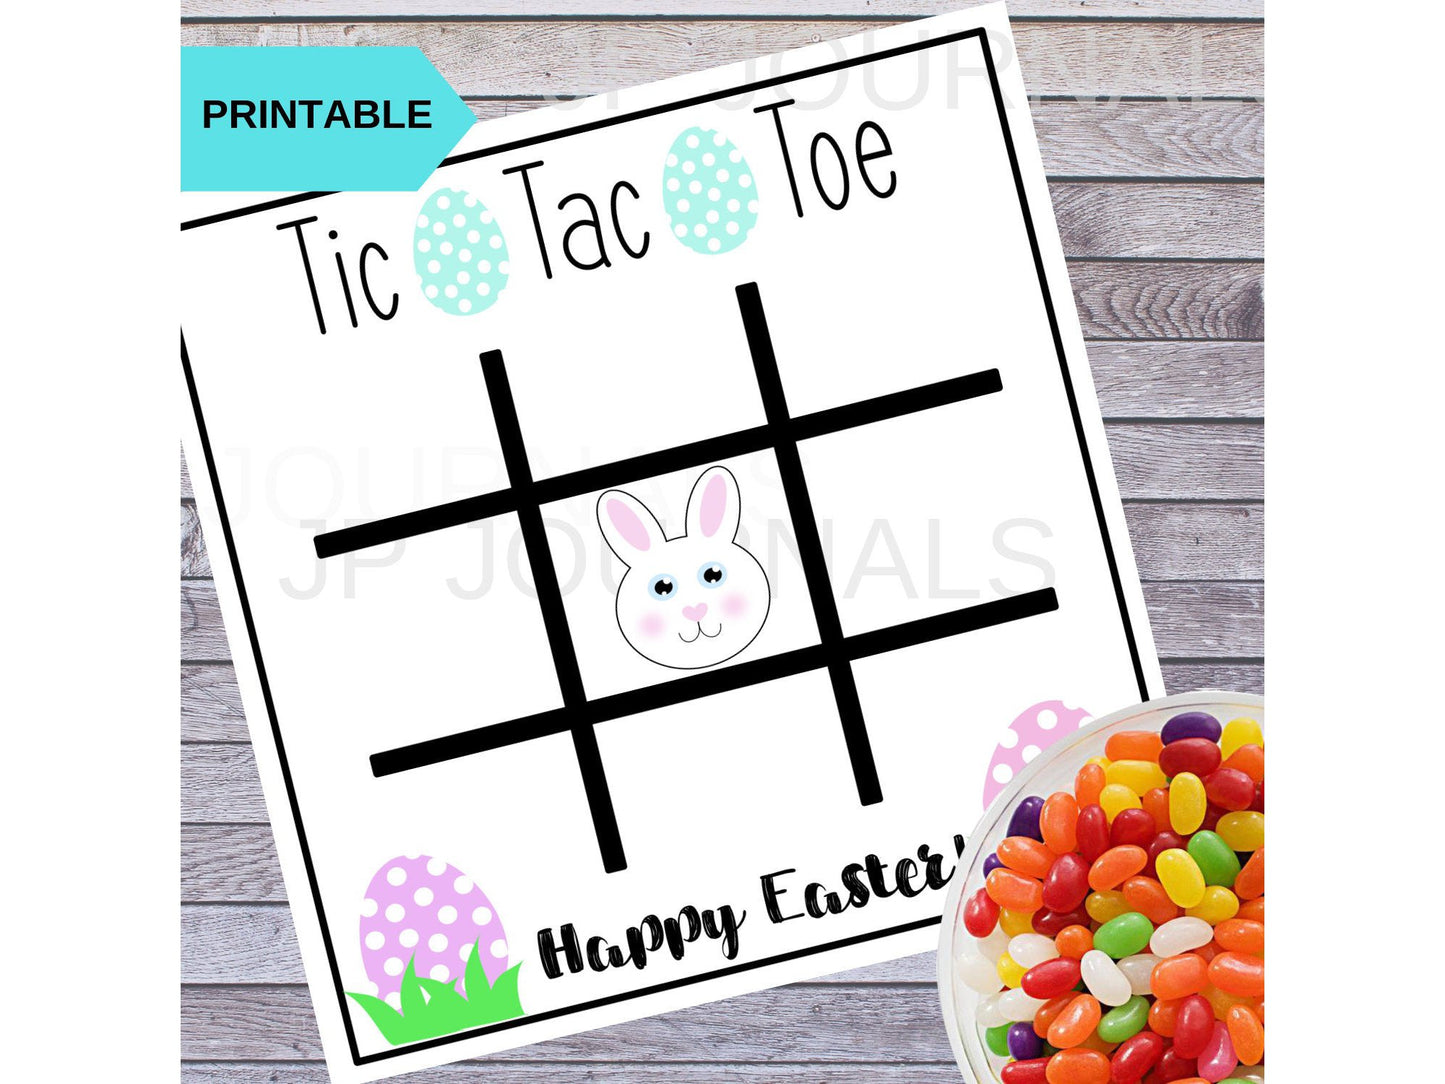 Easter Printable Tic Tac Toe Game Activity Card - DIY Printable Easter Cards (Great for Kids and School Parties!) PNG PDF - Cute Easter Gift